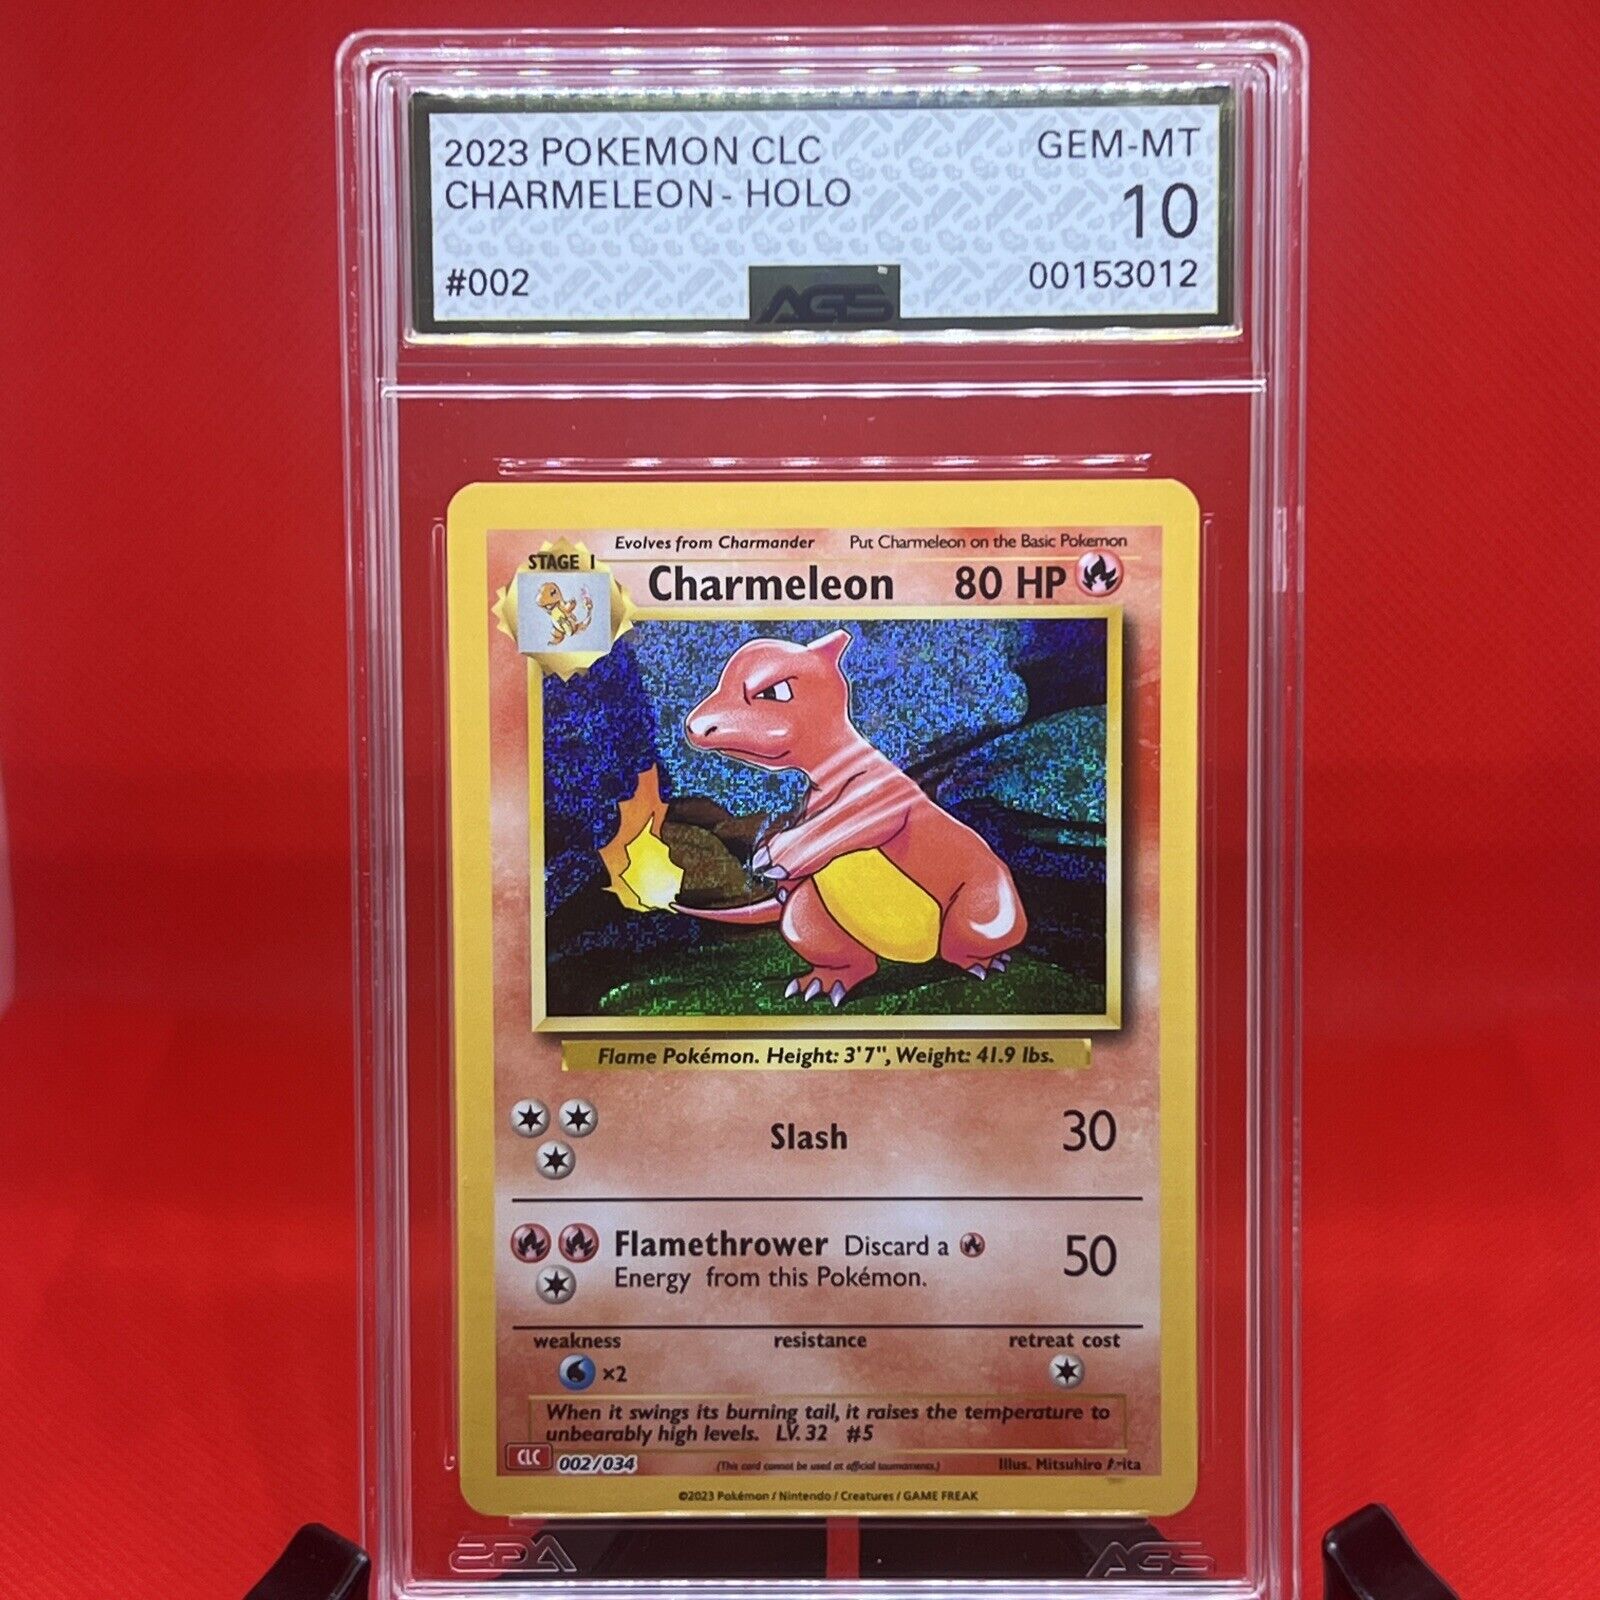 🔥2023 Pokemon Classic Collection 002 Charmeleon Holo English Gem Mt AGS 10 ✨